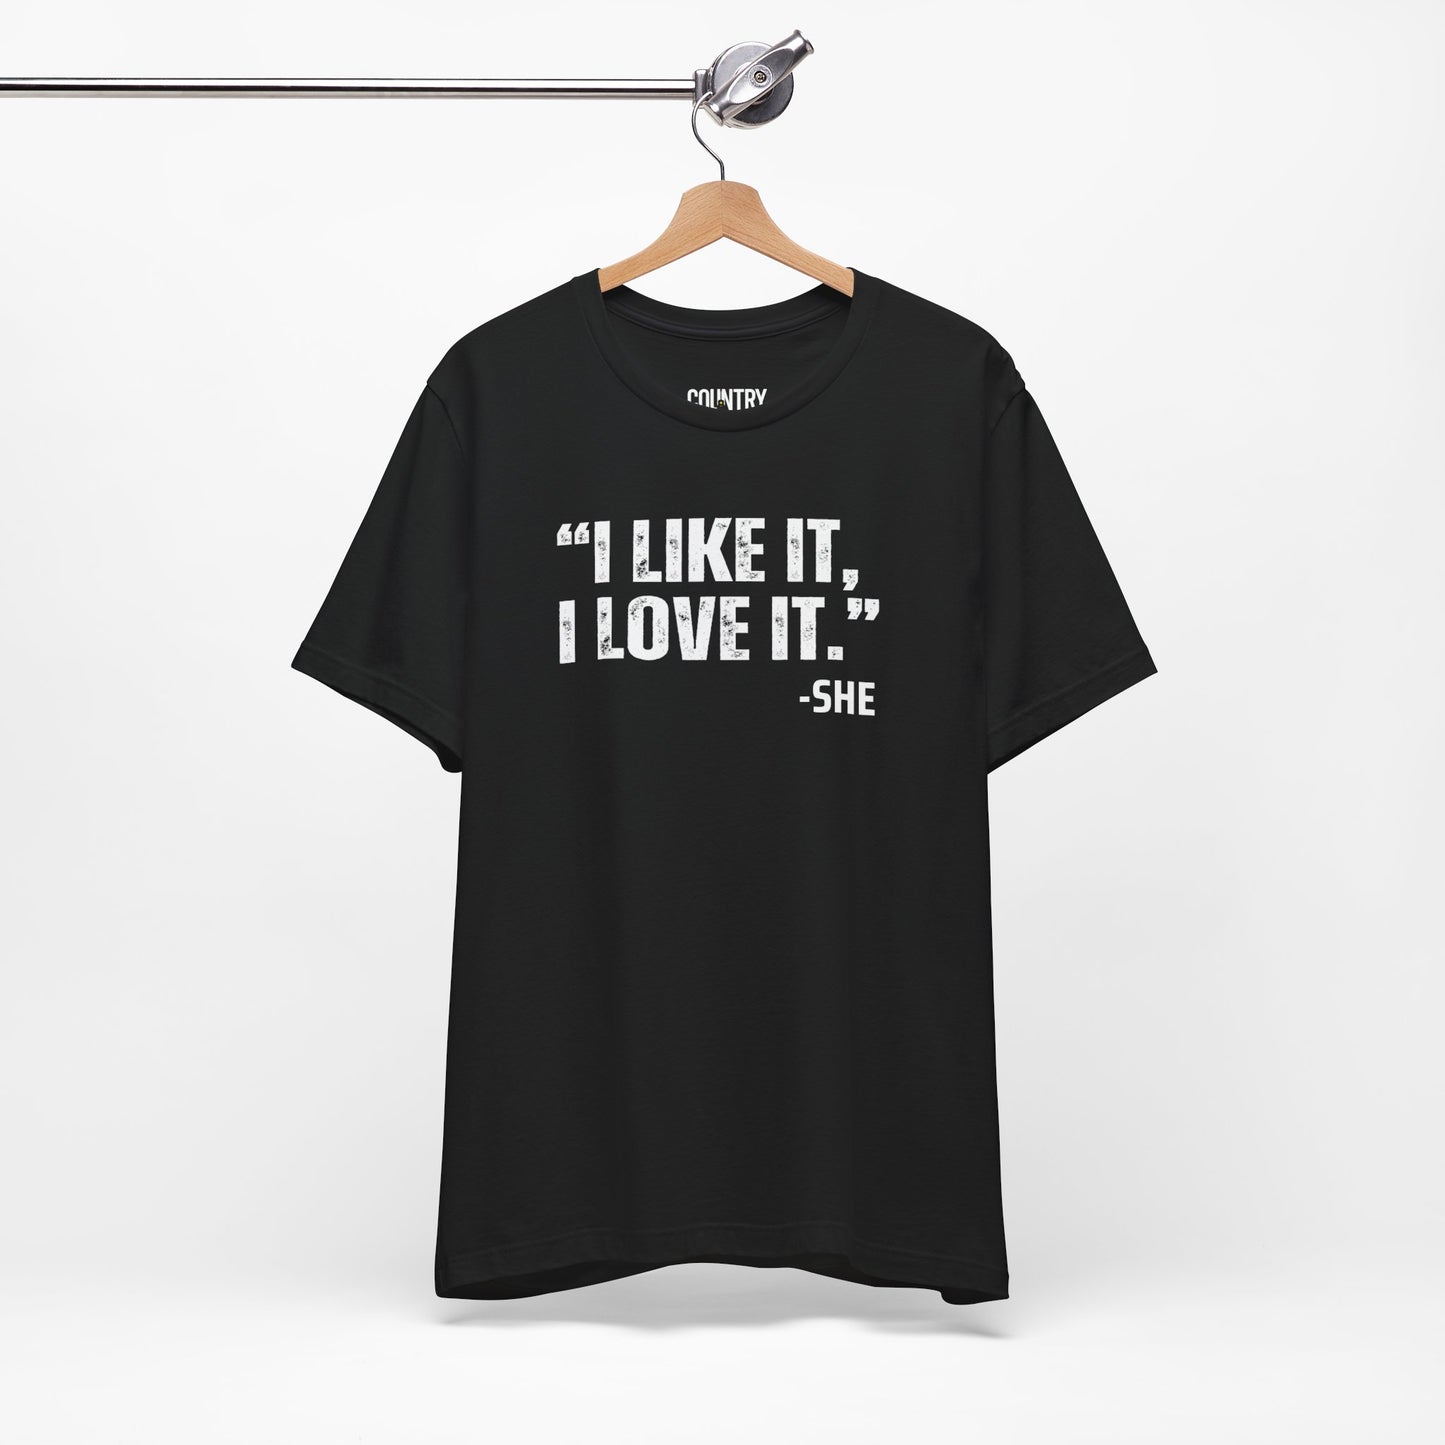 90s Country x The Office Mashup Tee: 'I Like It, I Love It' - SHE